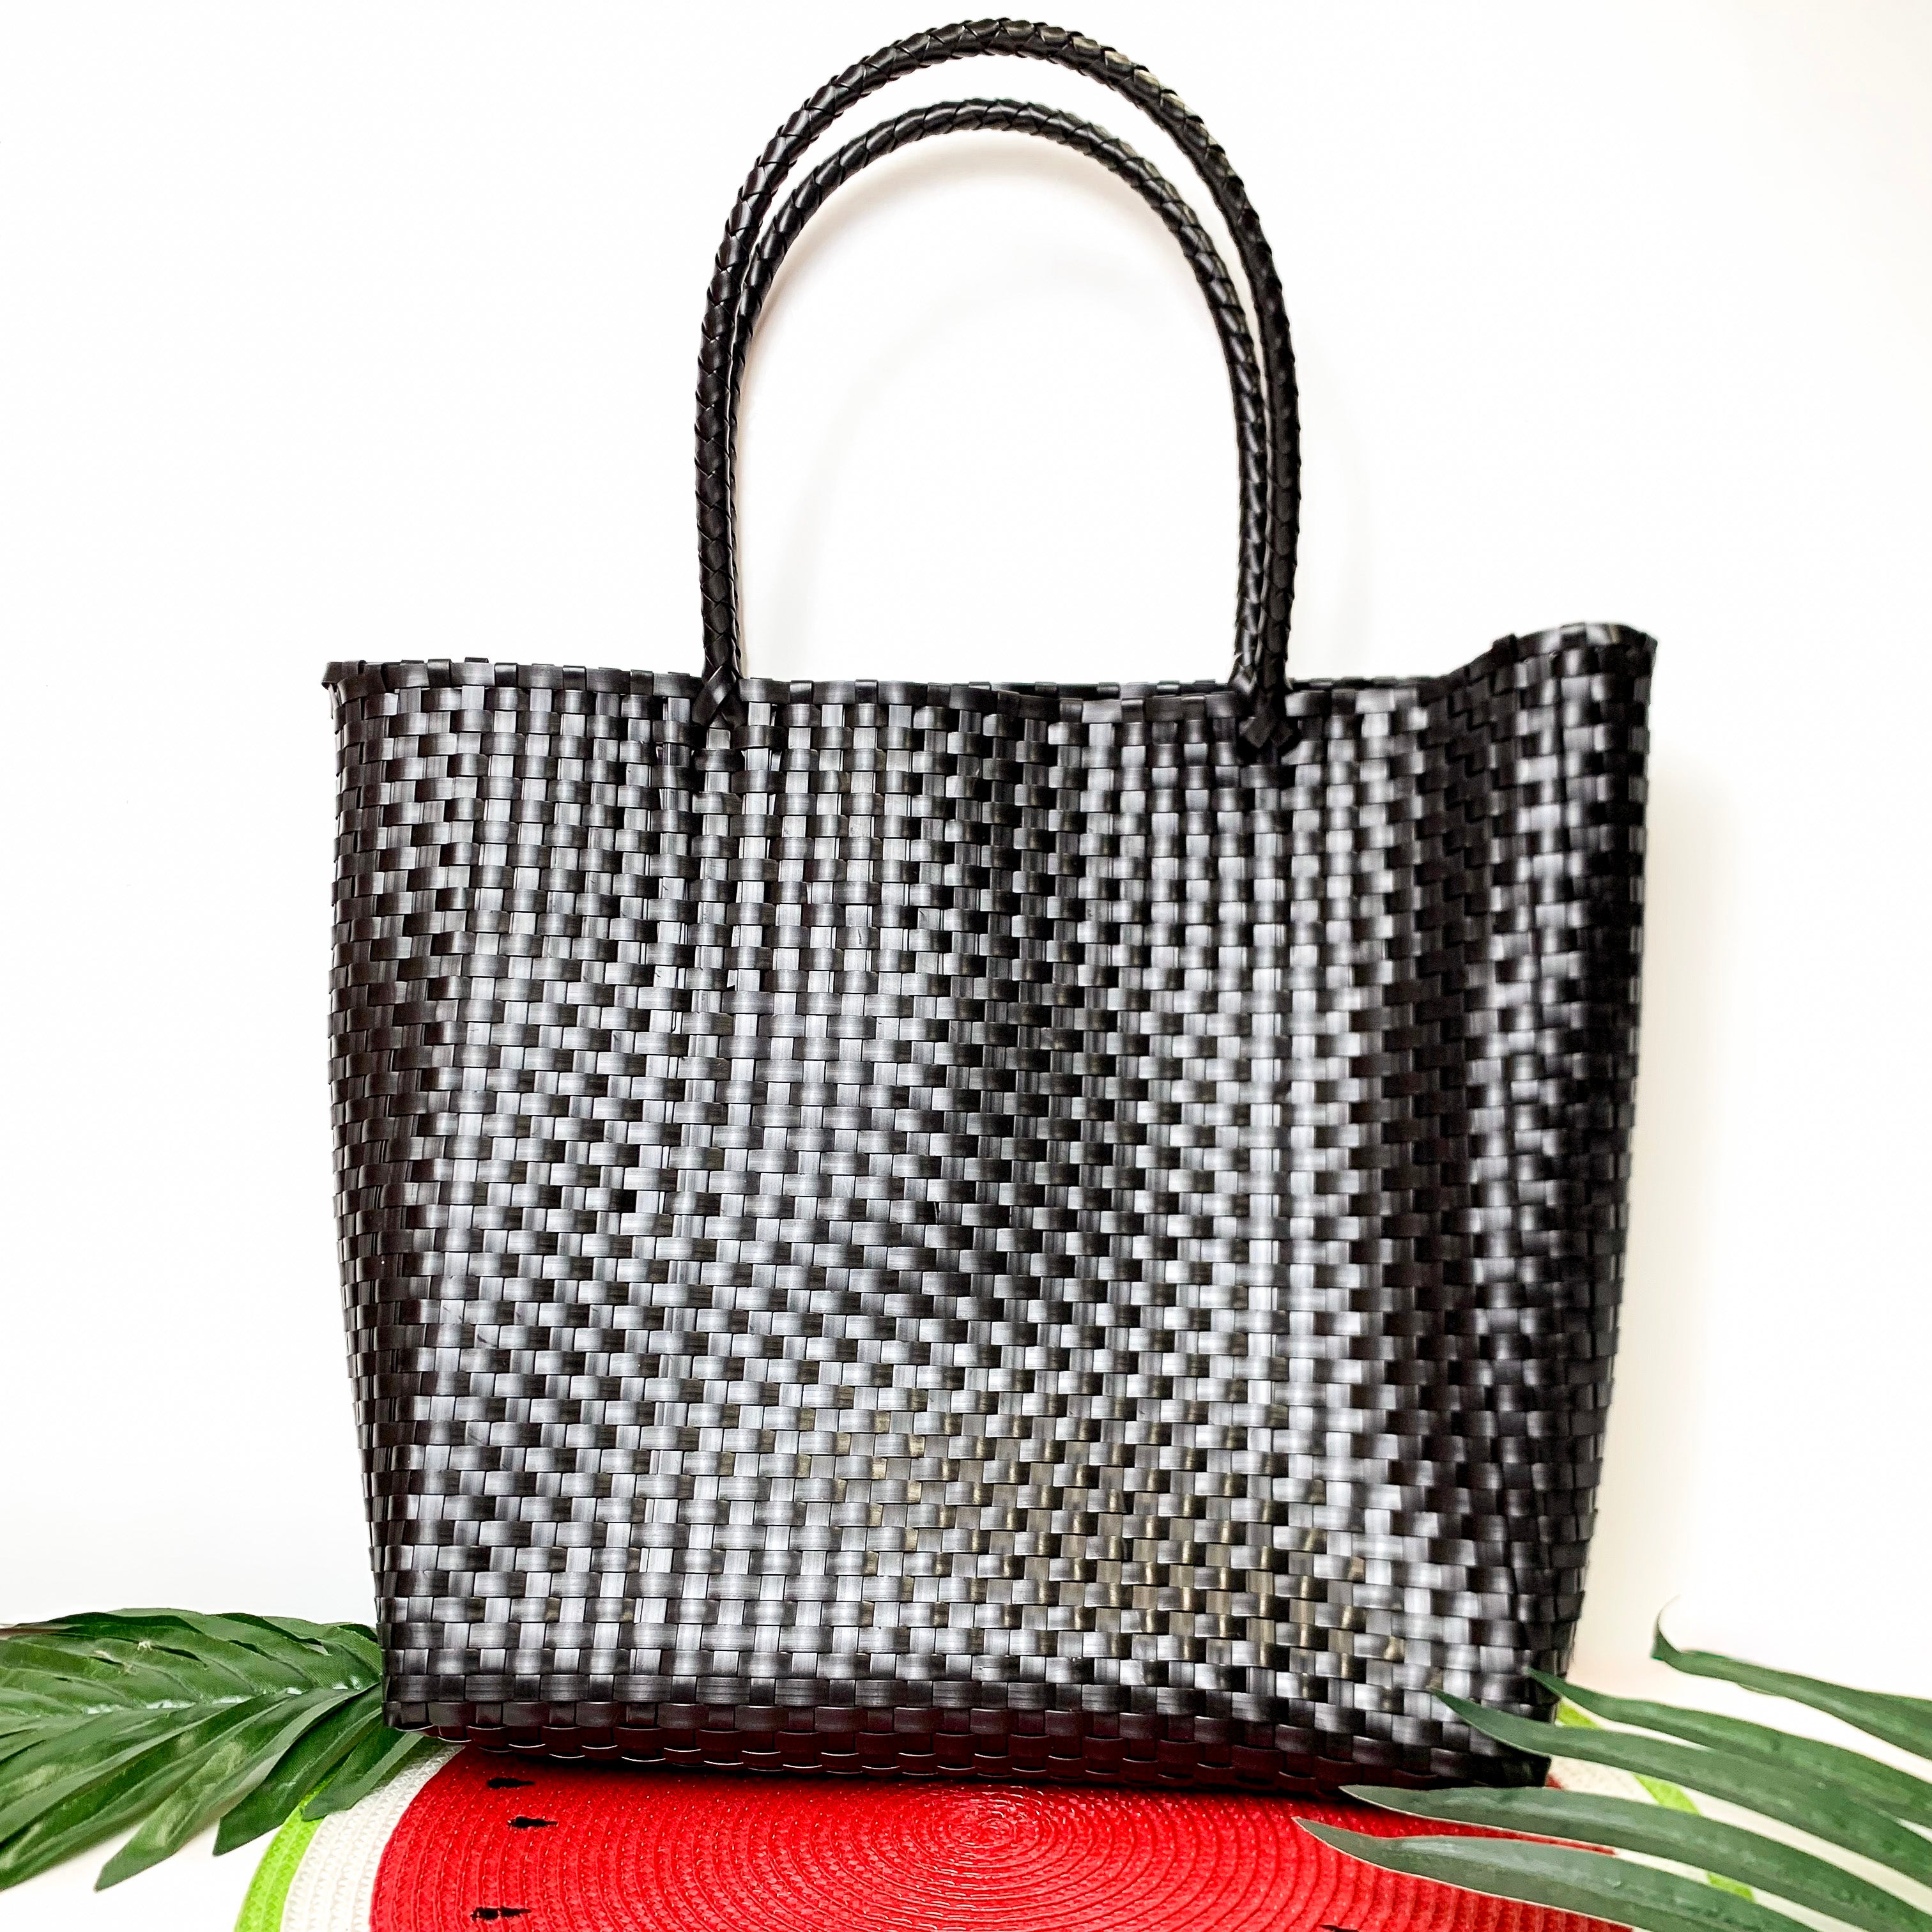 Coastal Couture Carryall Tote Bag in Black